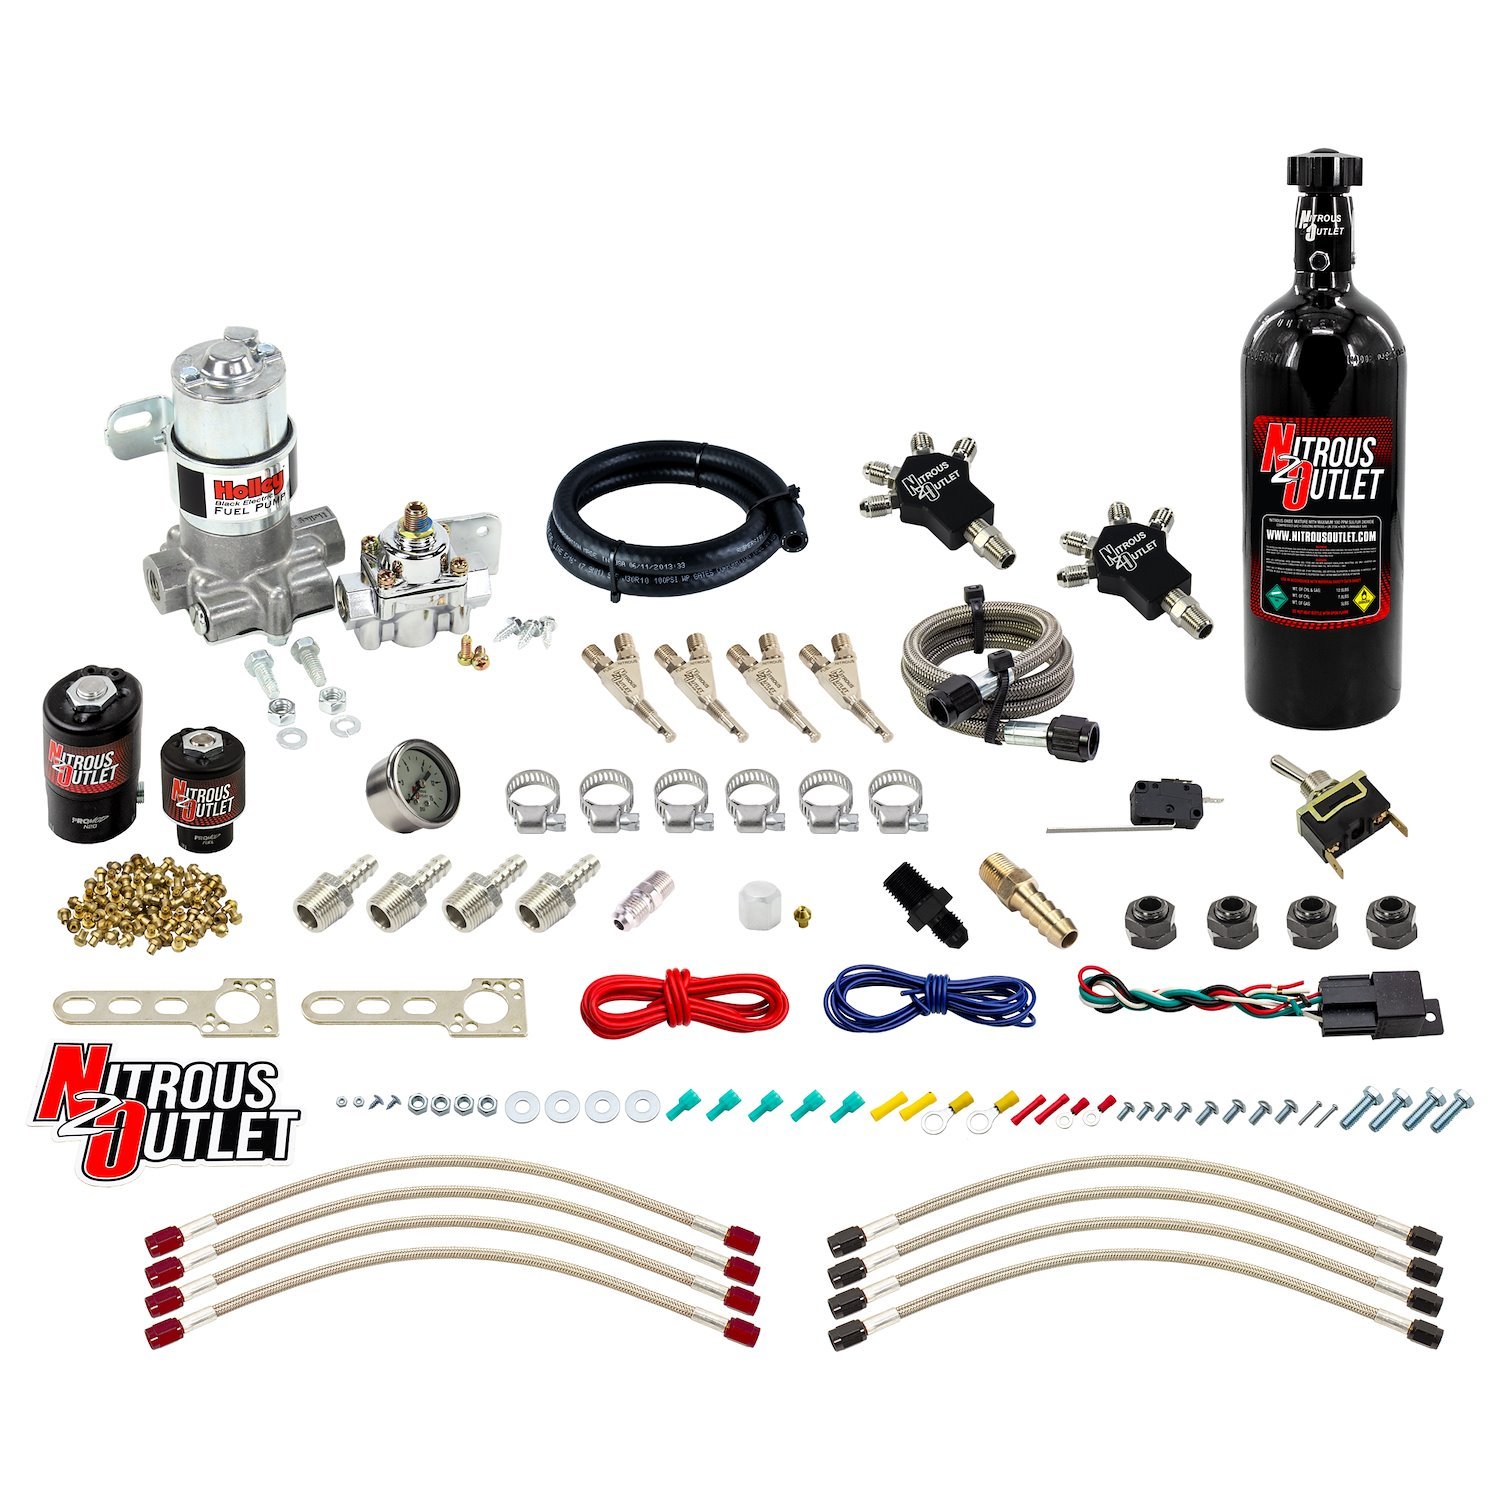 50-10200-5 Powersports 4-Cyl Pro Mod Nozzle System, Stainless 90-Degree Nozzles, Gas, 10 psi, 5lb Bottle